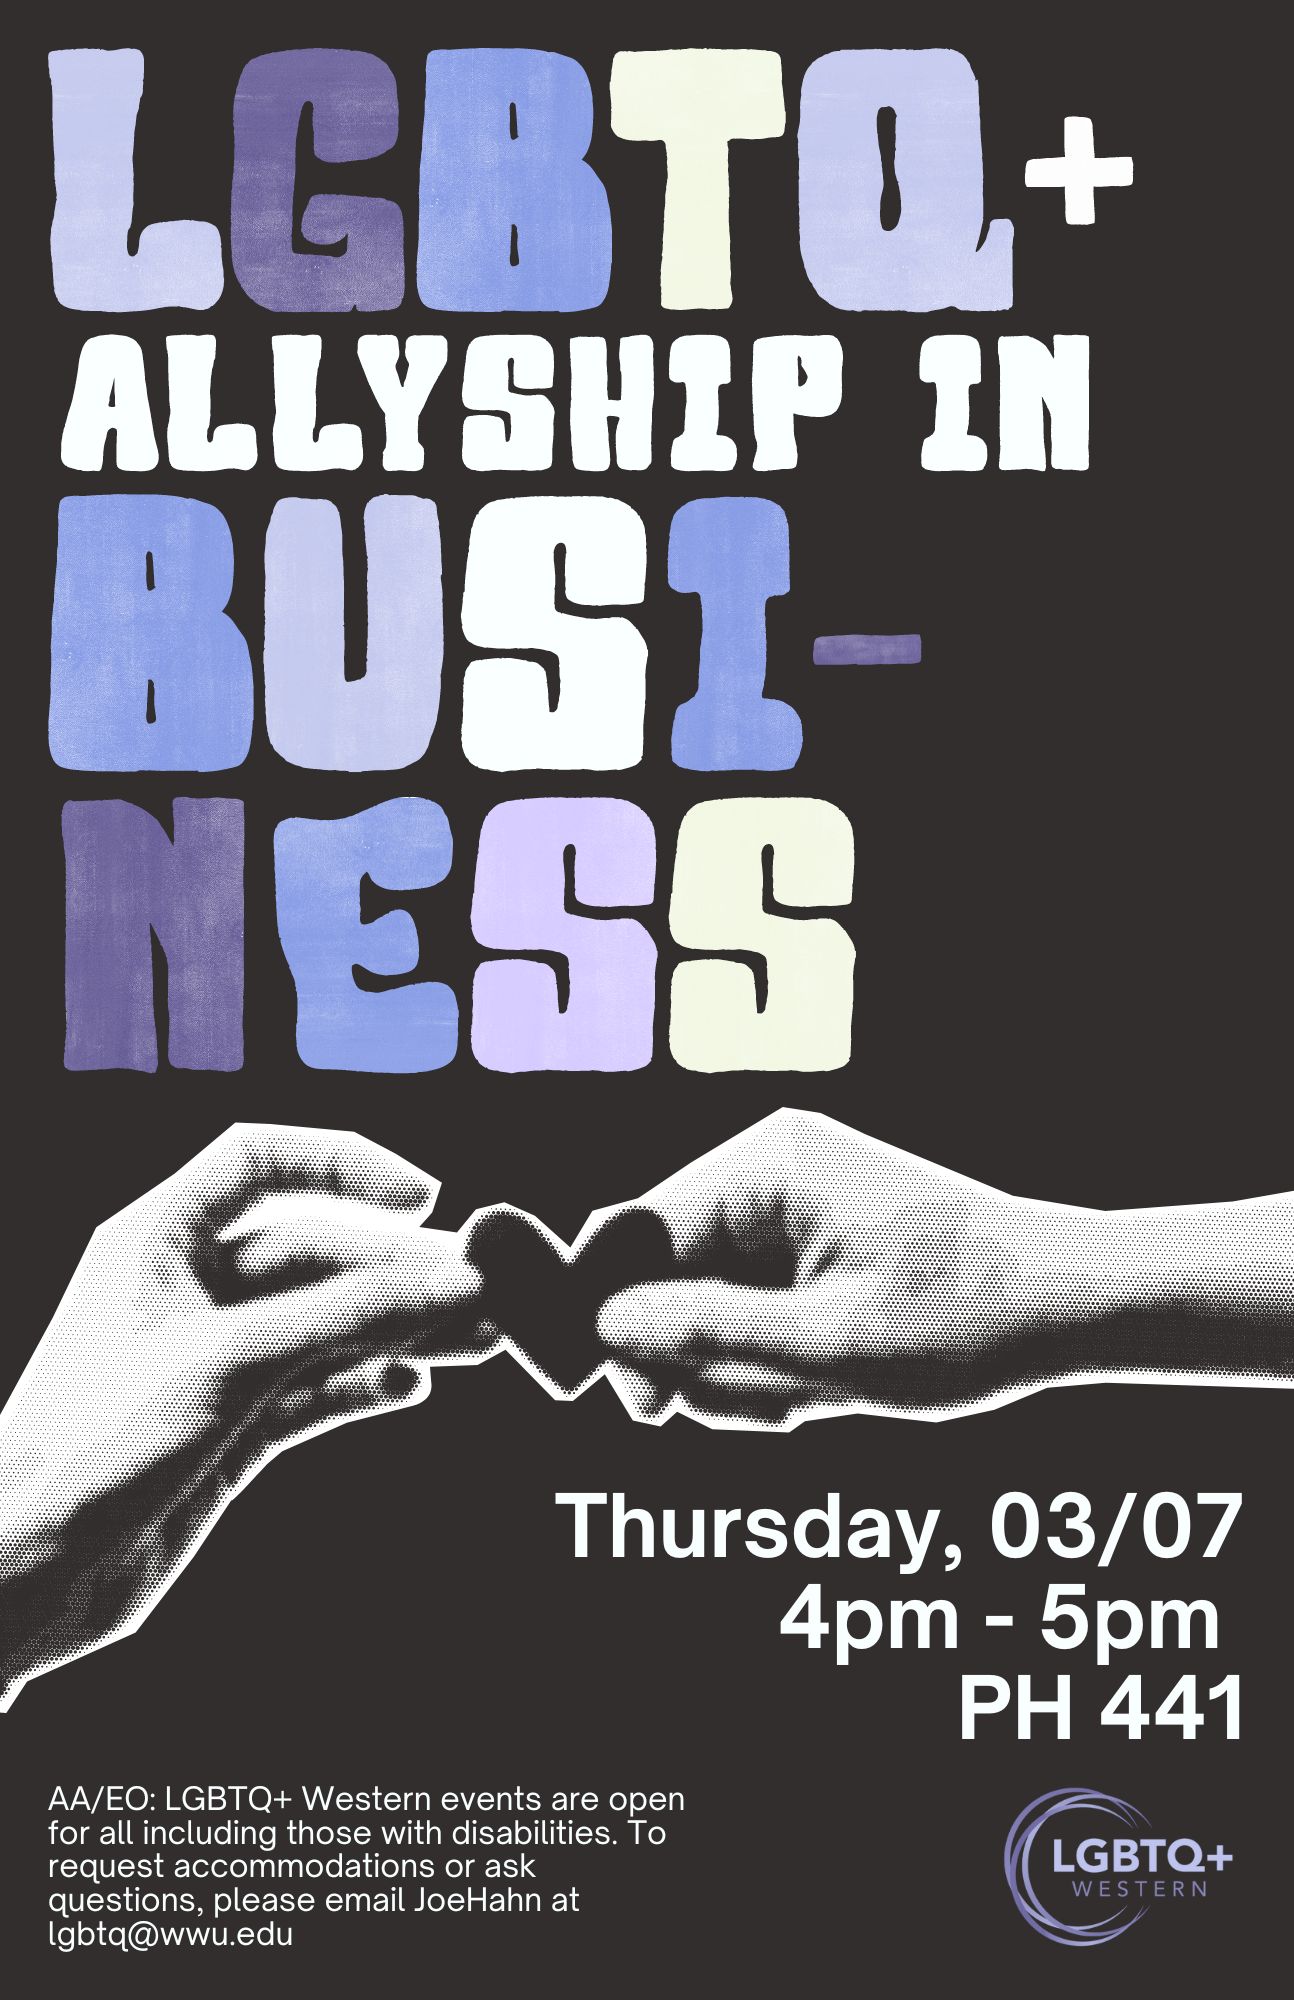 decorative flyer advertising the LGBTQ+ allyship in business event.